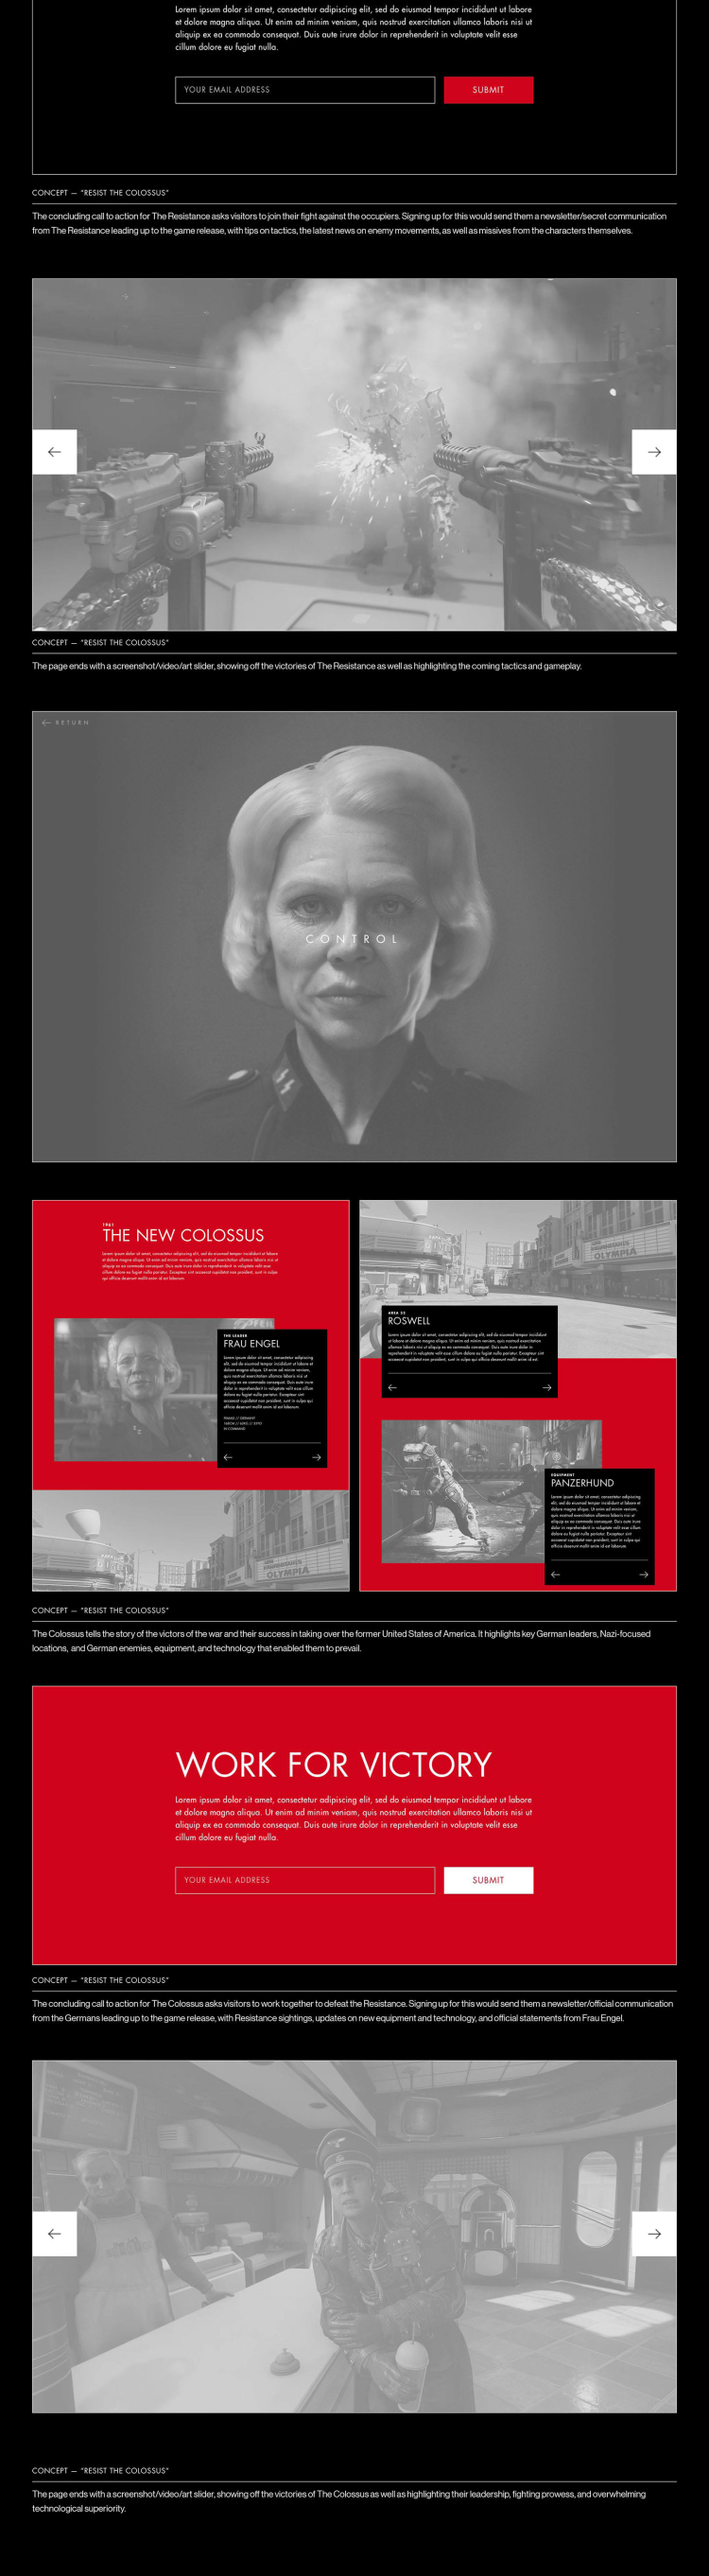 Initial "Resist" concept for the Wolfenstein II site